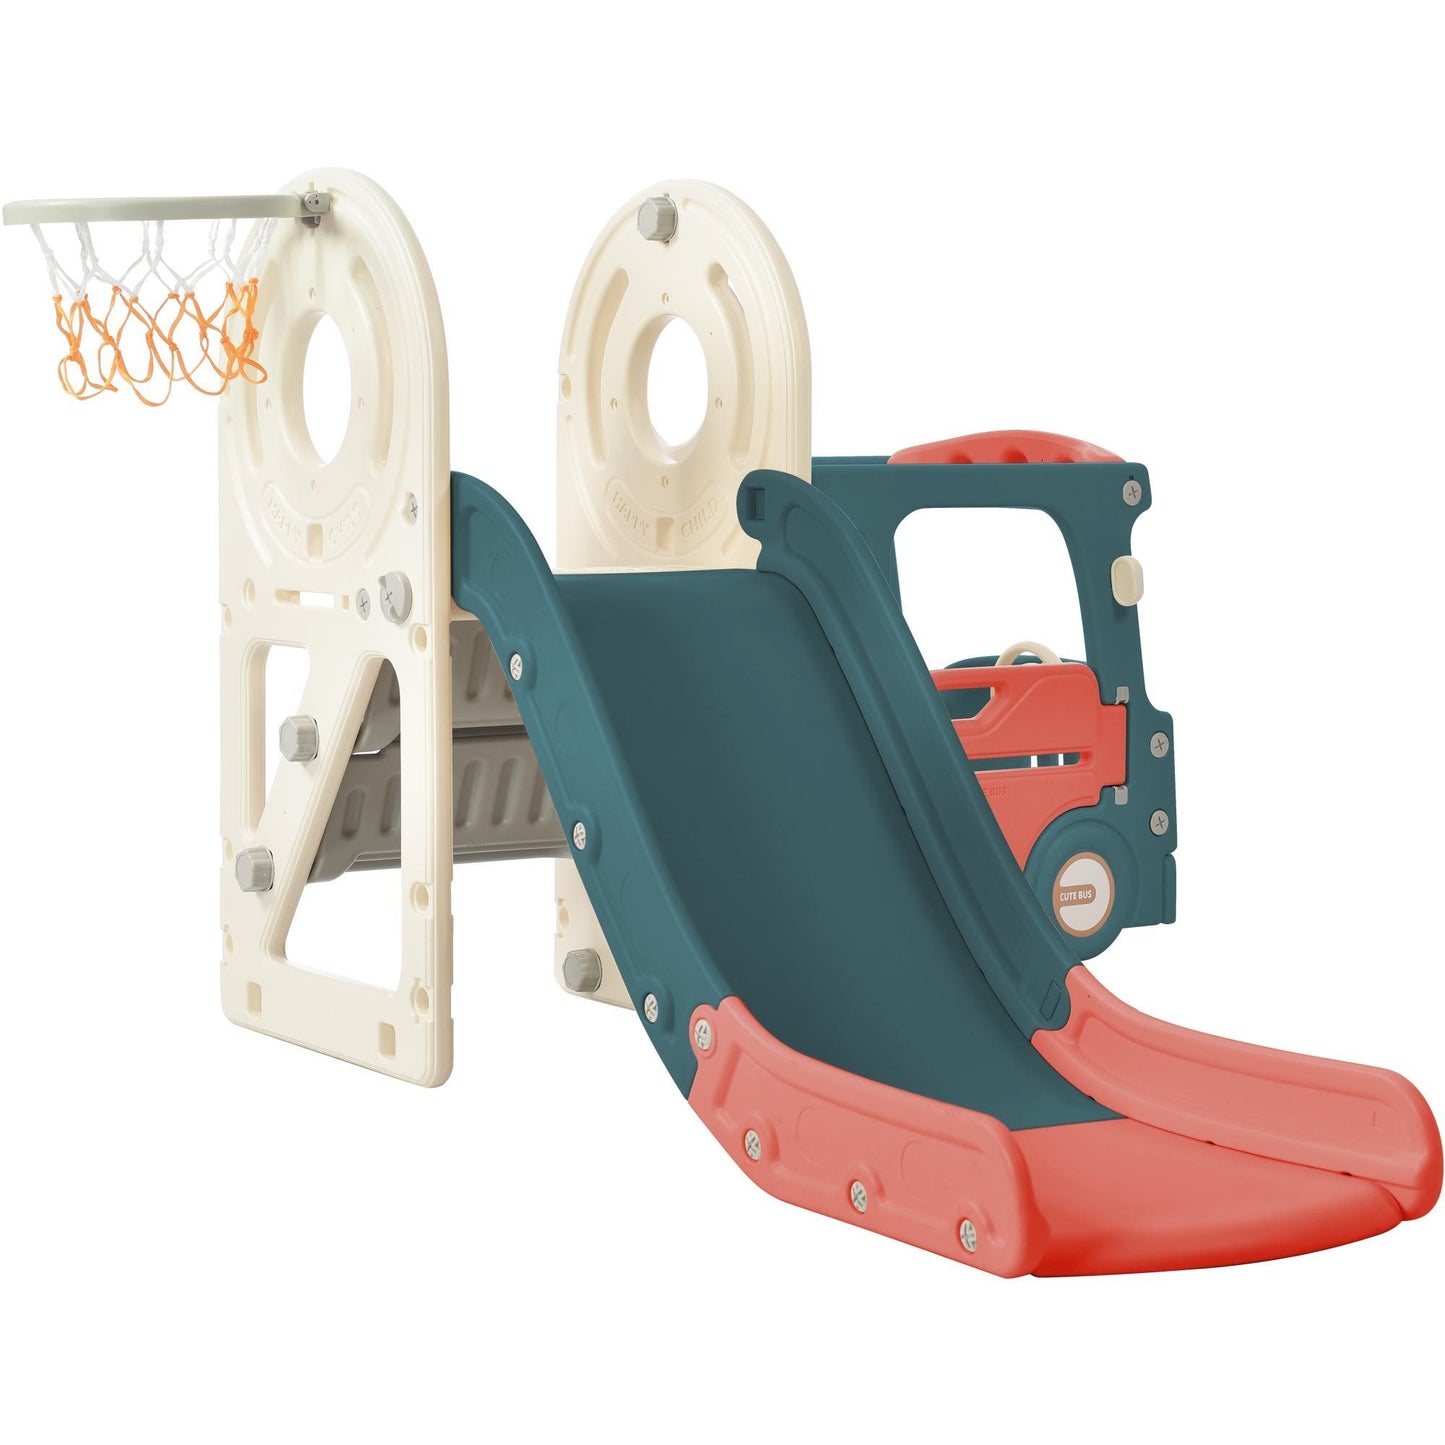 Kids Slide with Bus Play Structure, Freestanding Bus Toy with Slide for Toddlers, Bus Slide Set with Basketball Hoop